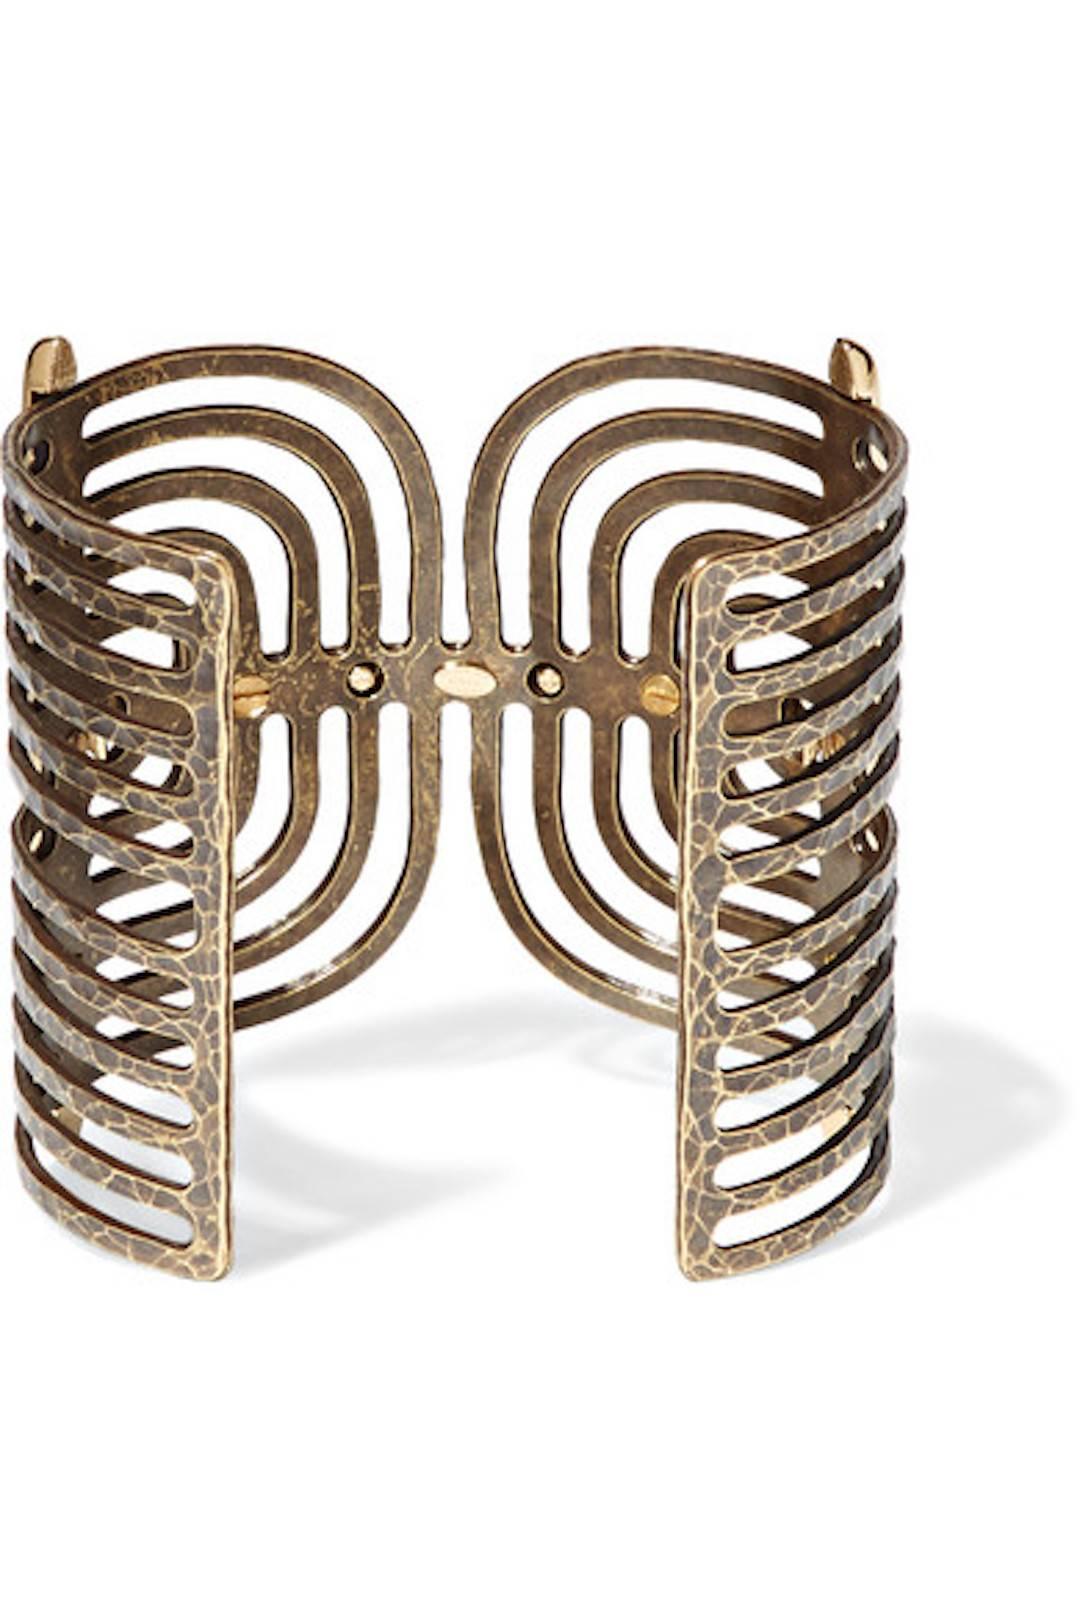 Lanvin NEW & SOLD OUT Brass Cage Cuff Bracelet in Box 1